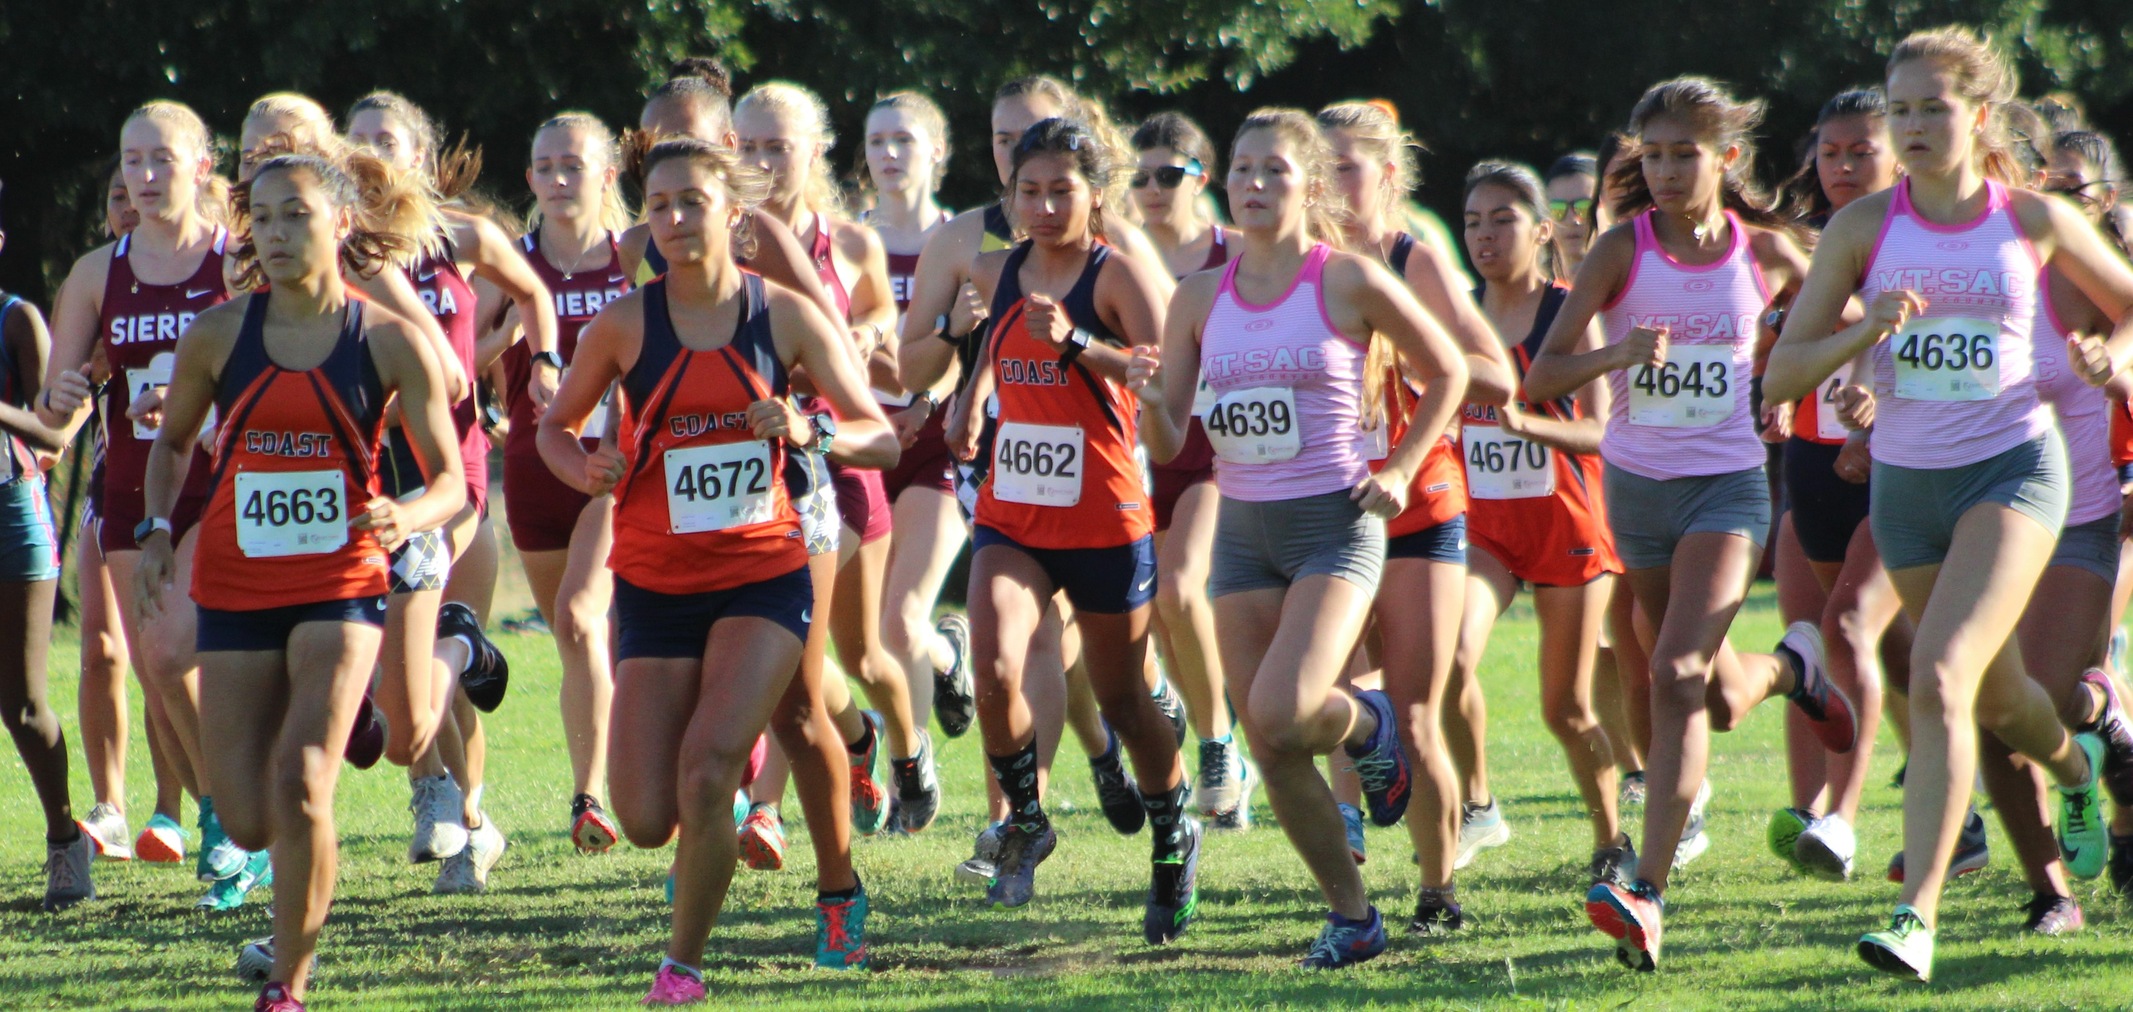 OCC women take third overall at GWC Invitational